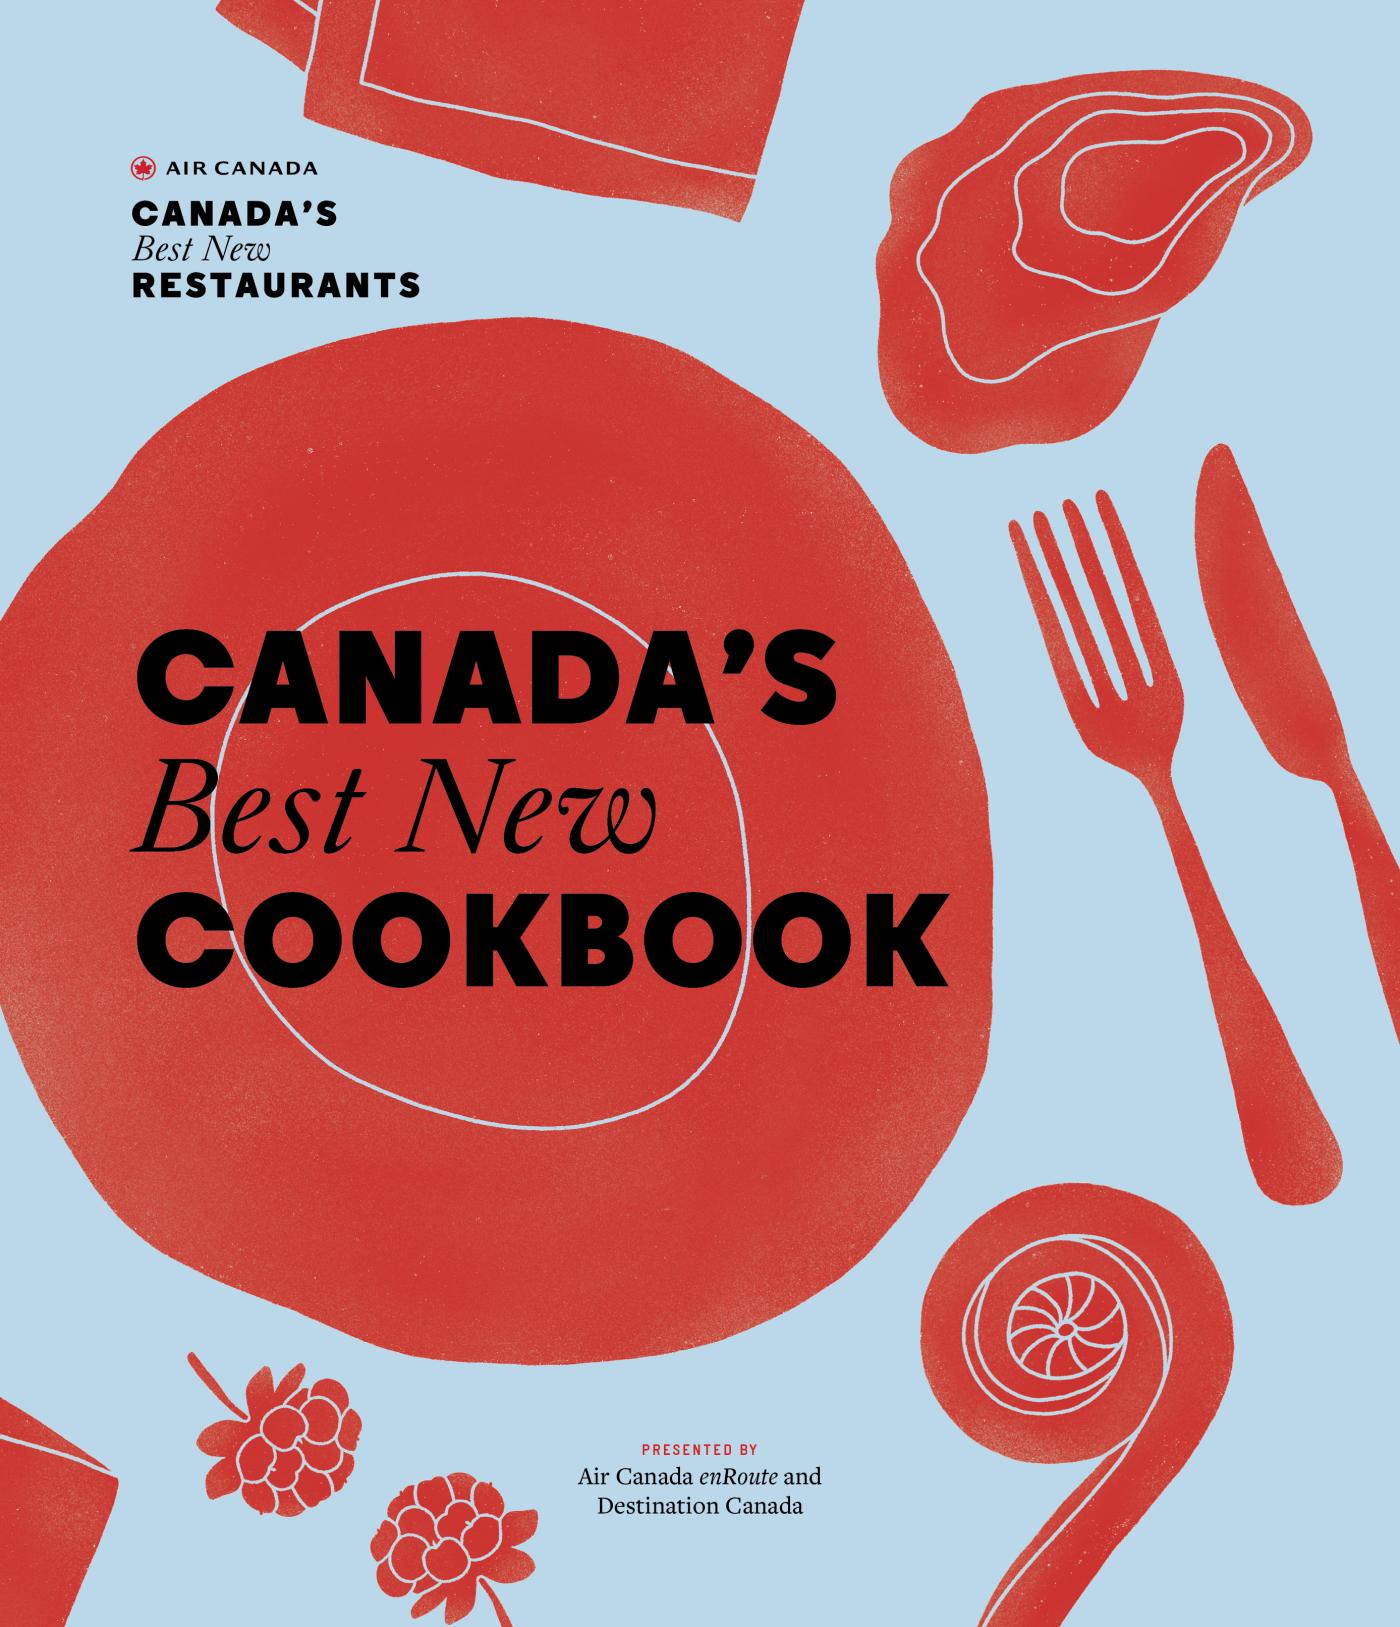 The cover of Canada's Best New Cookbook